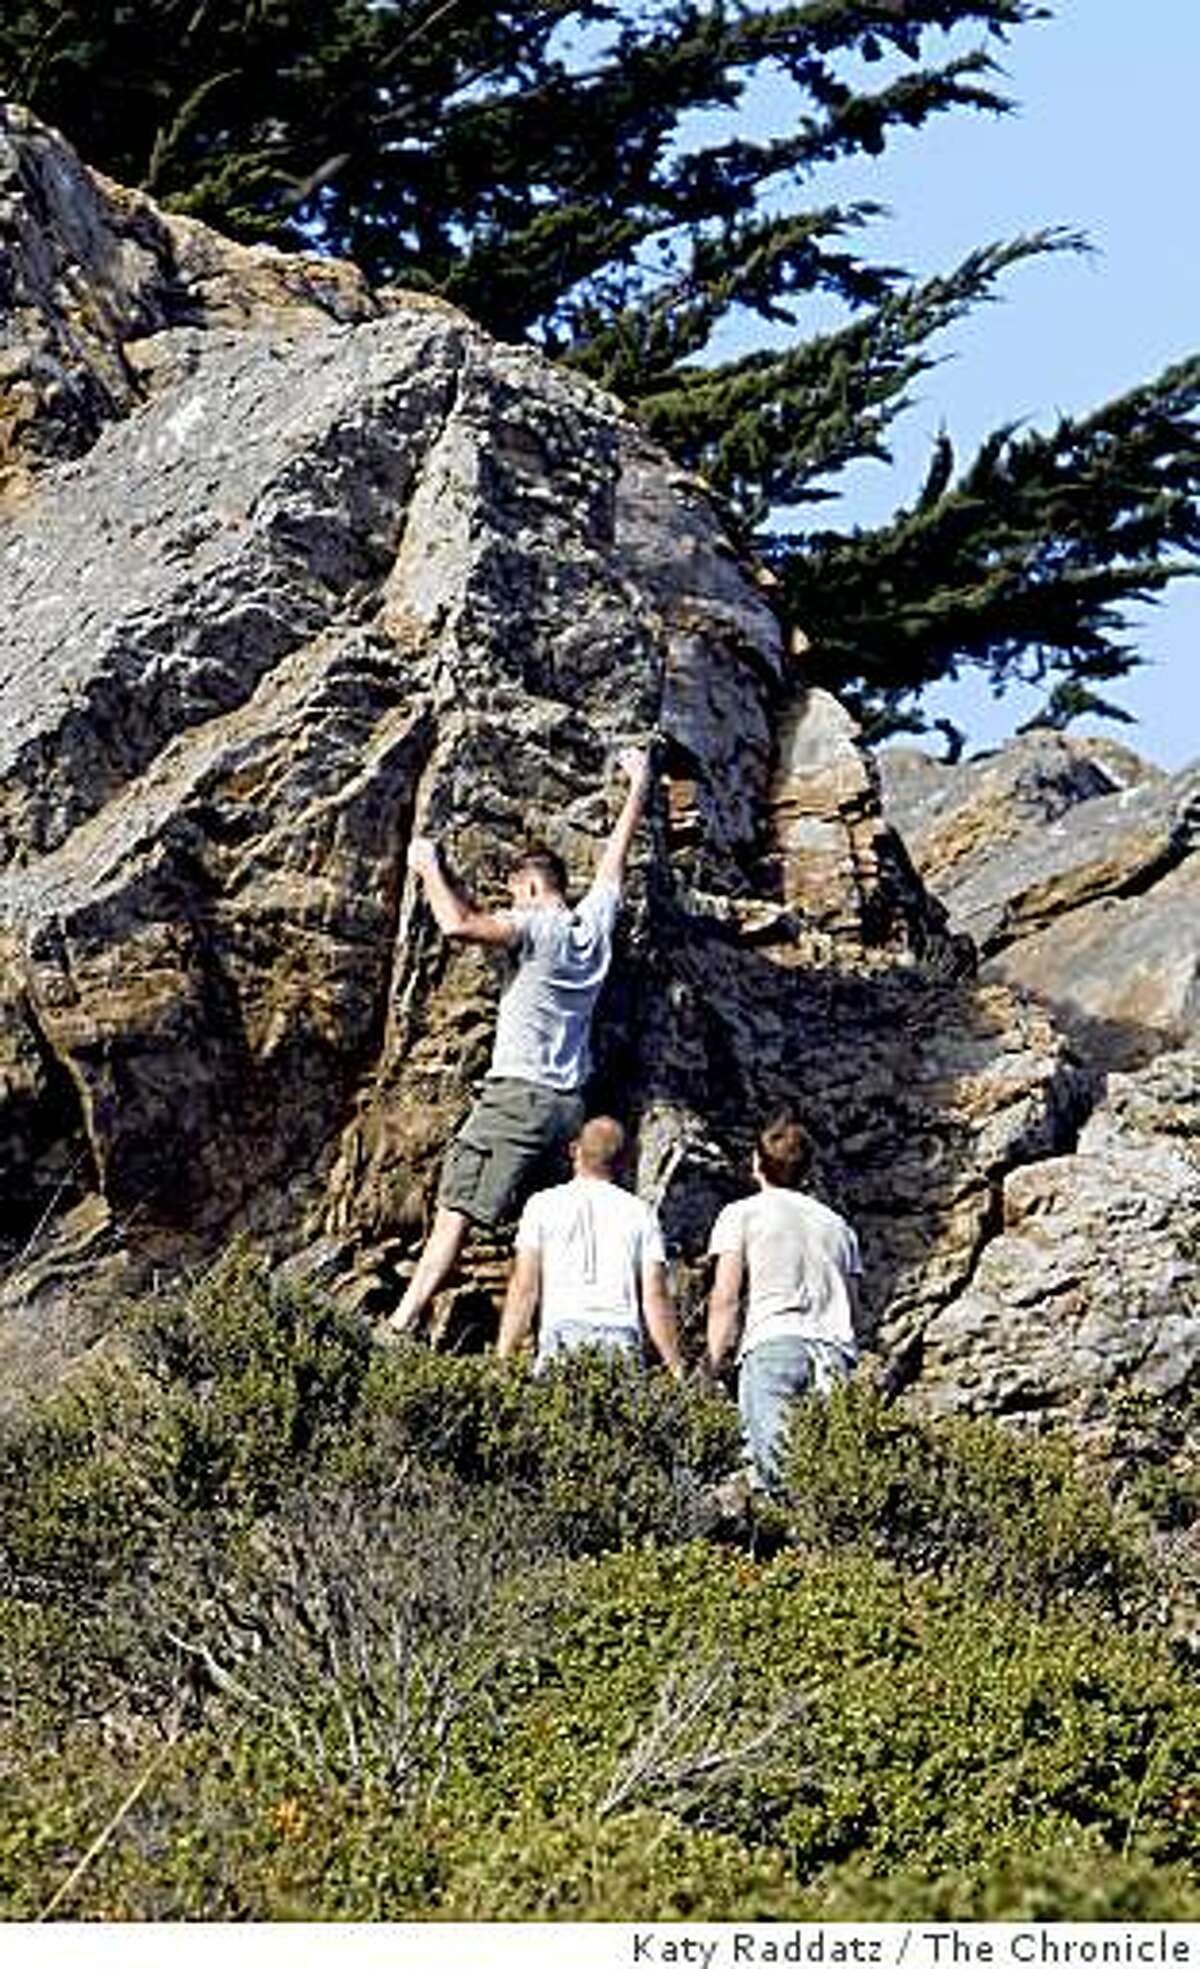 Rock climbers practice bouldering on one of the chert outcroppings in Glen Canyon, in San Francisco, Calif. Sunday, Aug. 3, 2008.